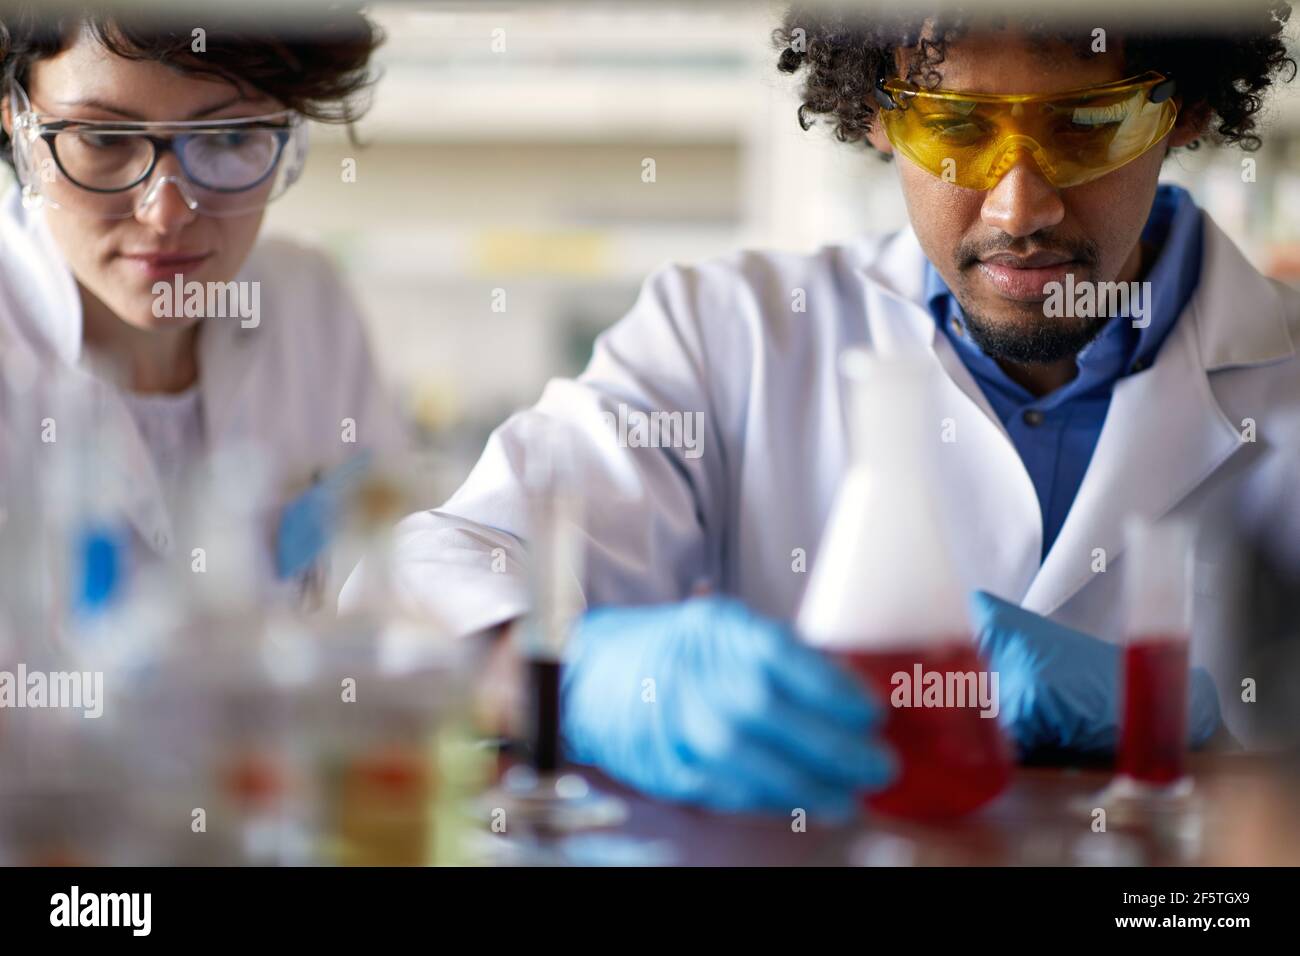 Young scientists in a protective gear observe chemical reactions in the sterile laboratory environment. Science, chemistry, lab, people Stock Photo